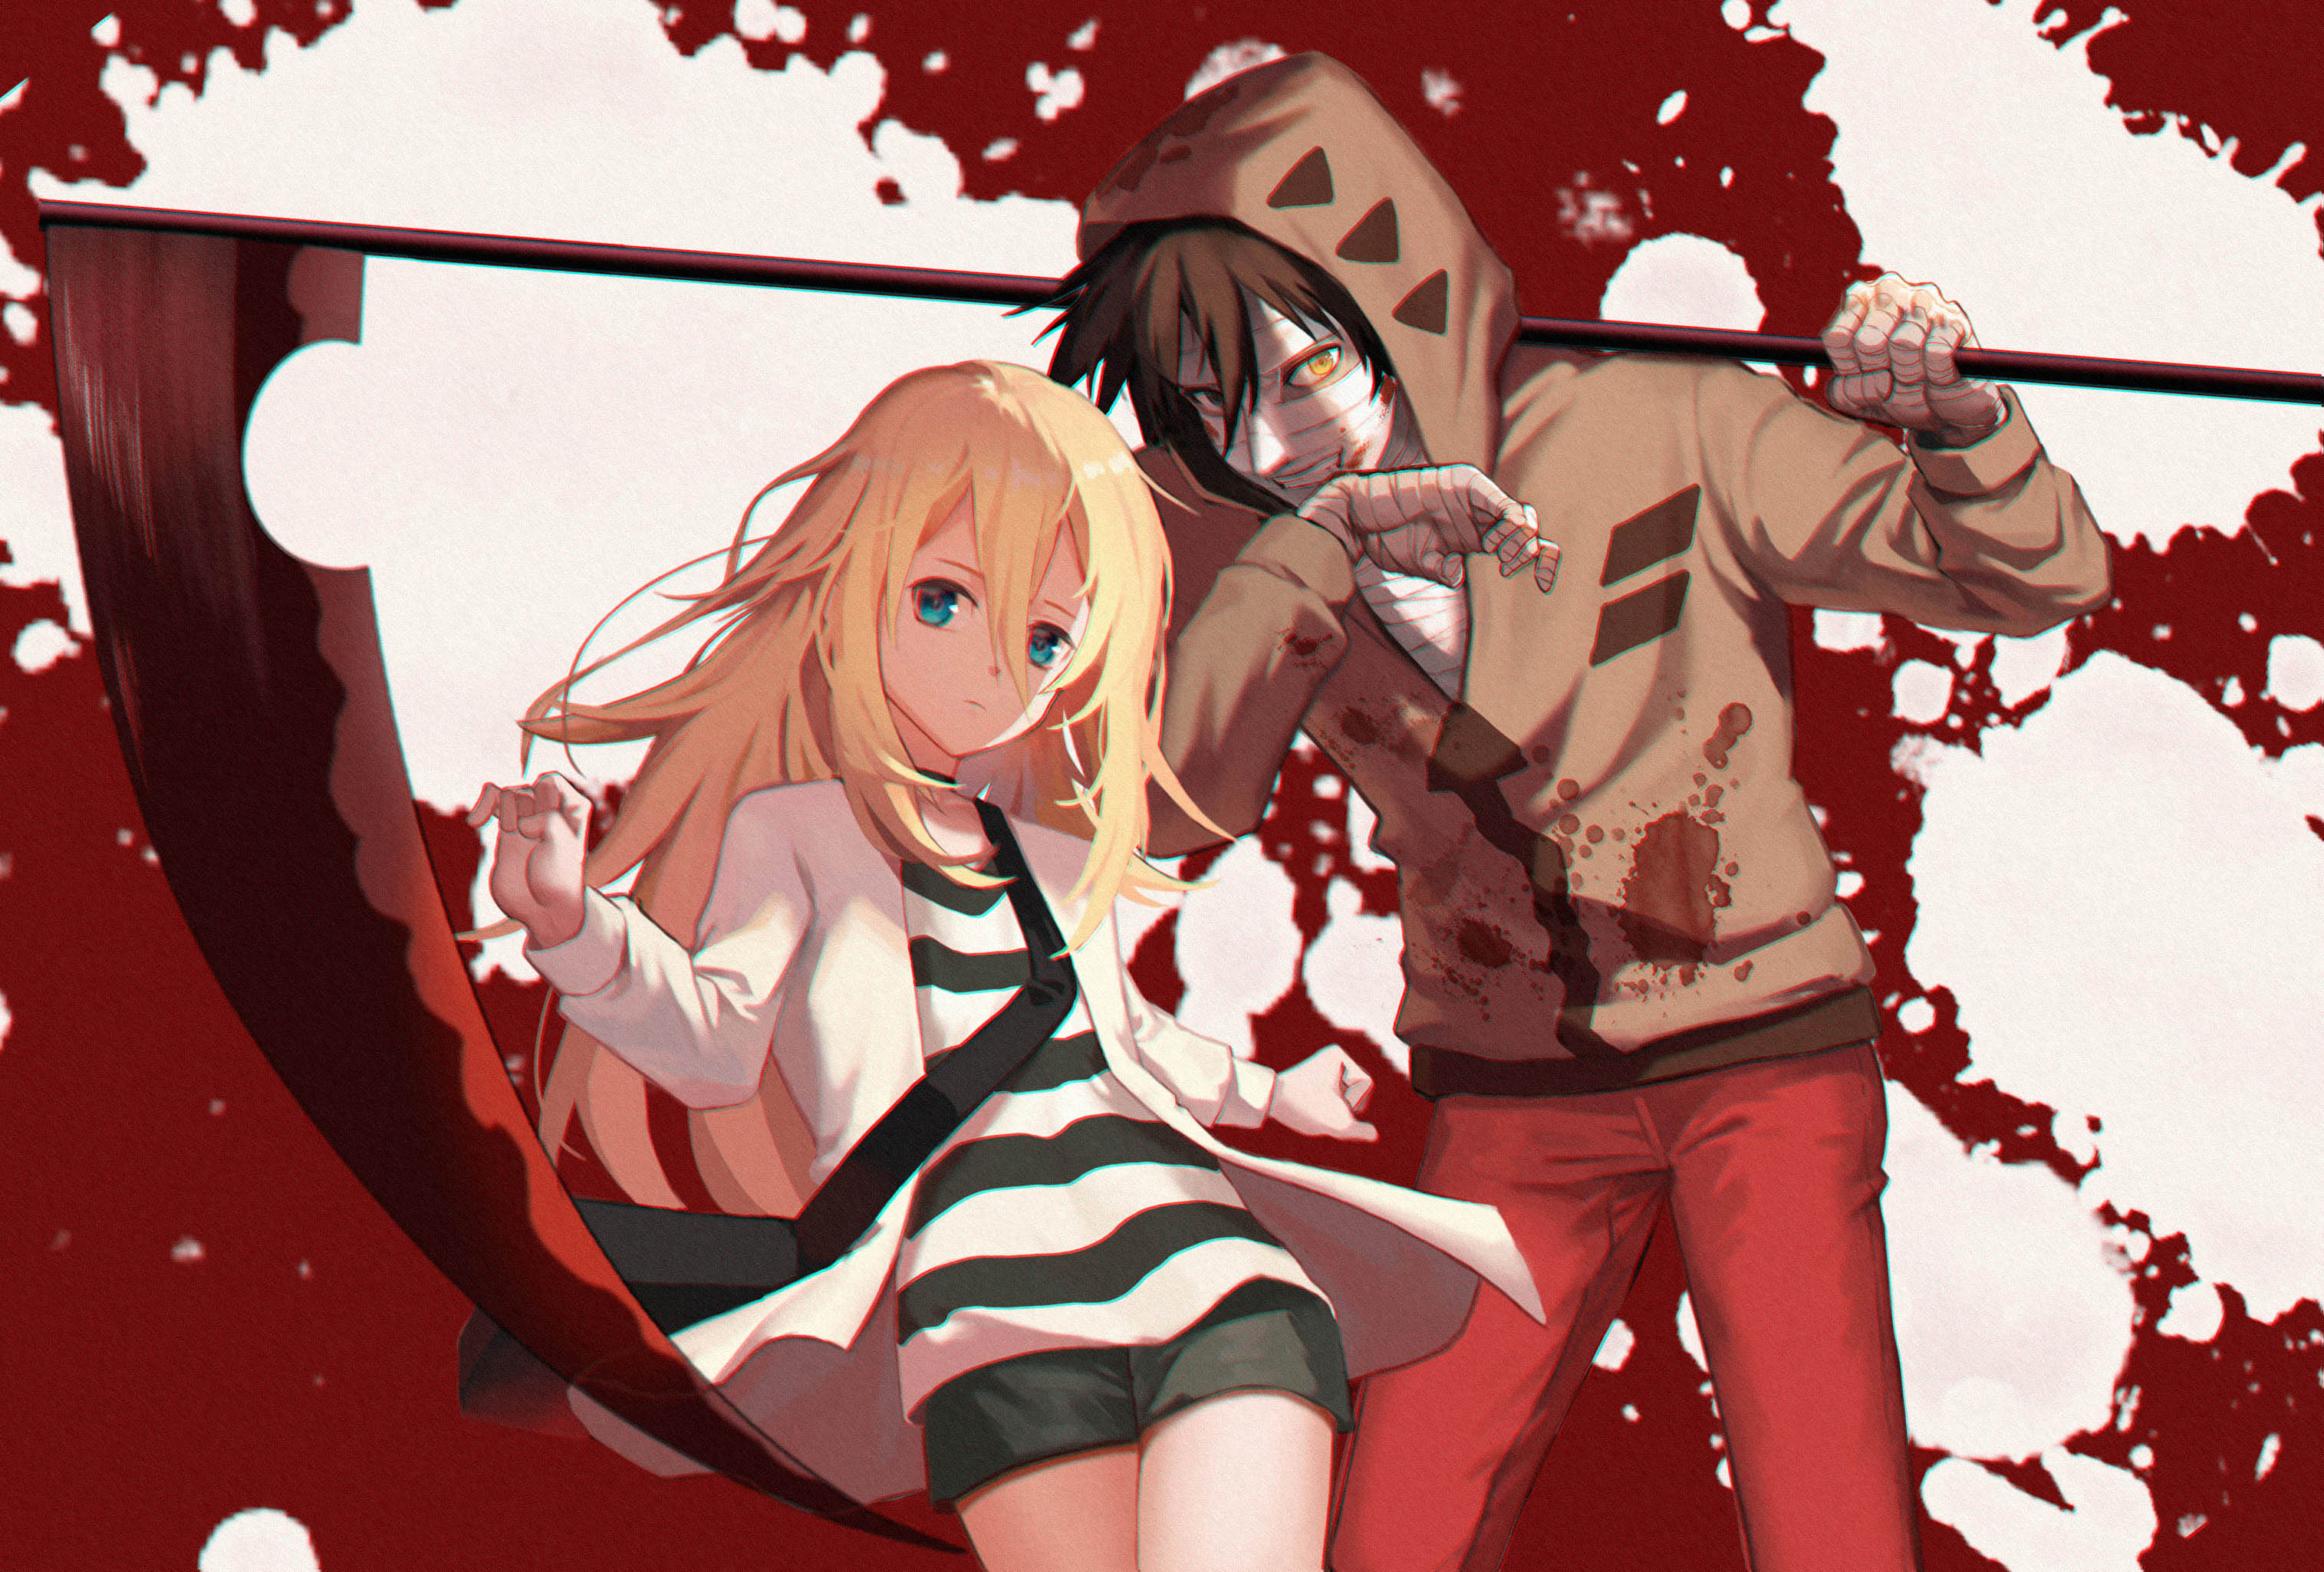 Anime Angels Of Death HD Wallpaper by swd3e2